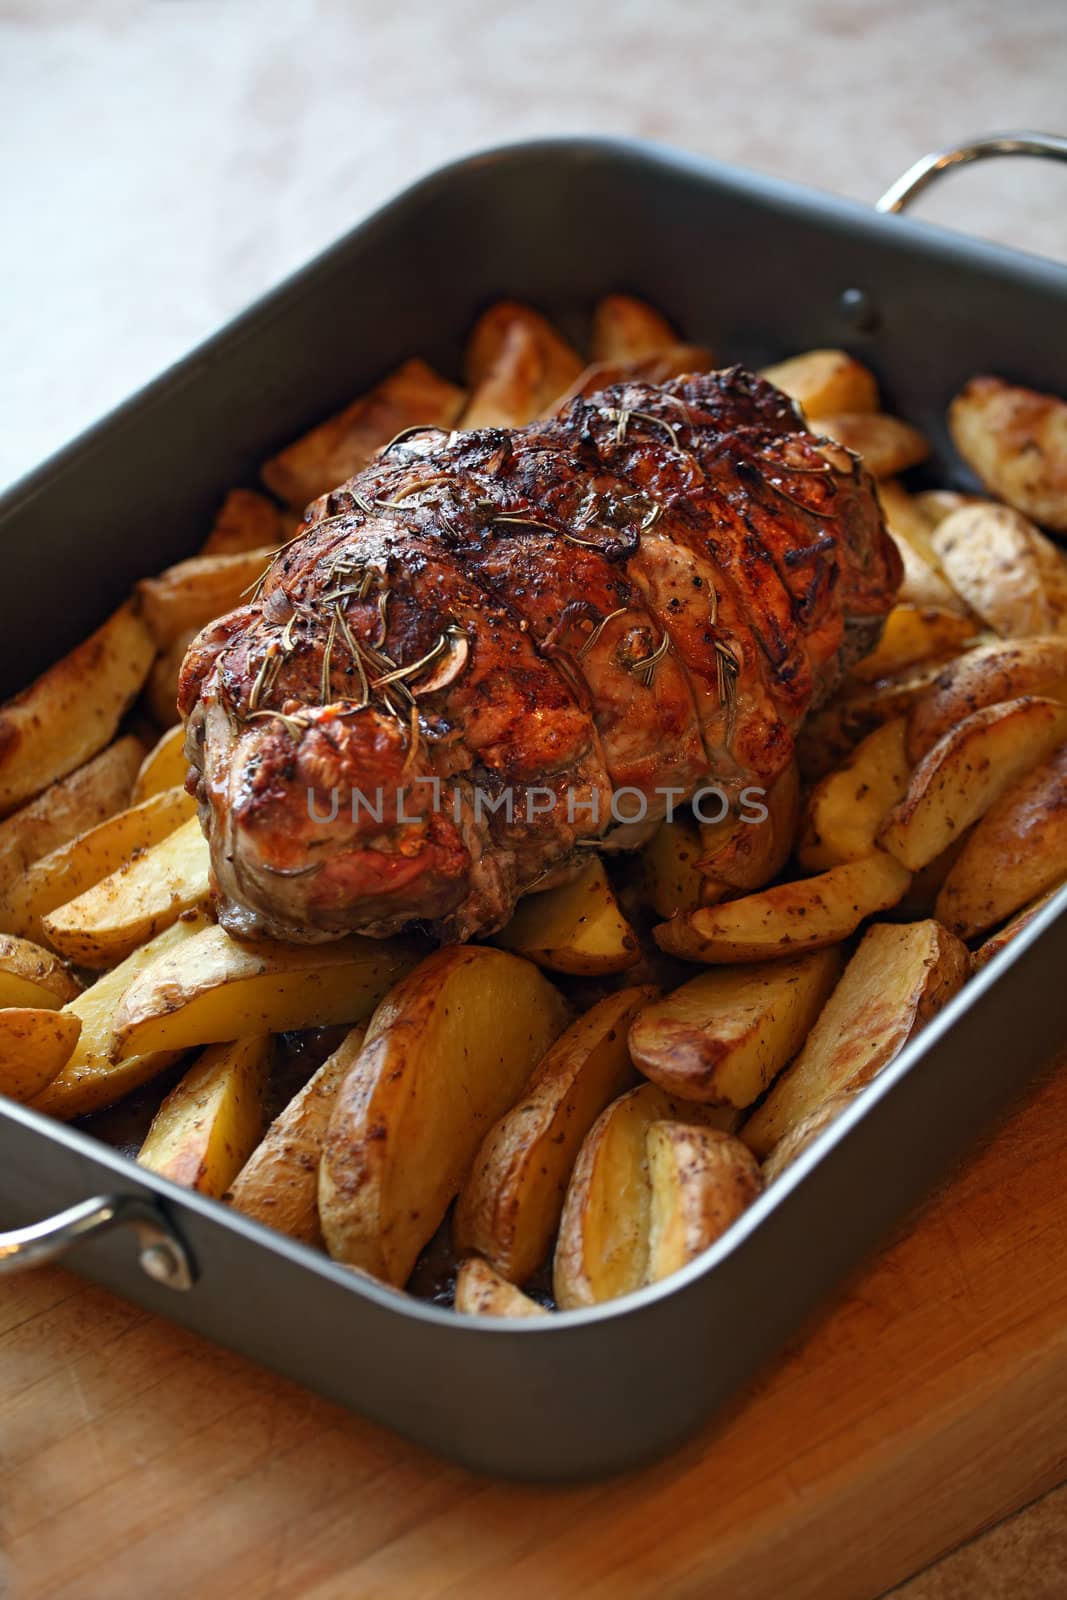 Photo of a lamb roast with potatoes in a roasting pan fresh out of the oven.
